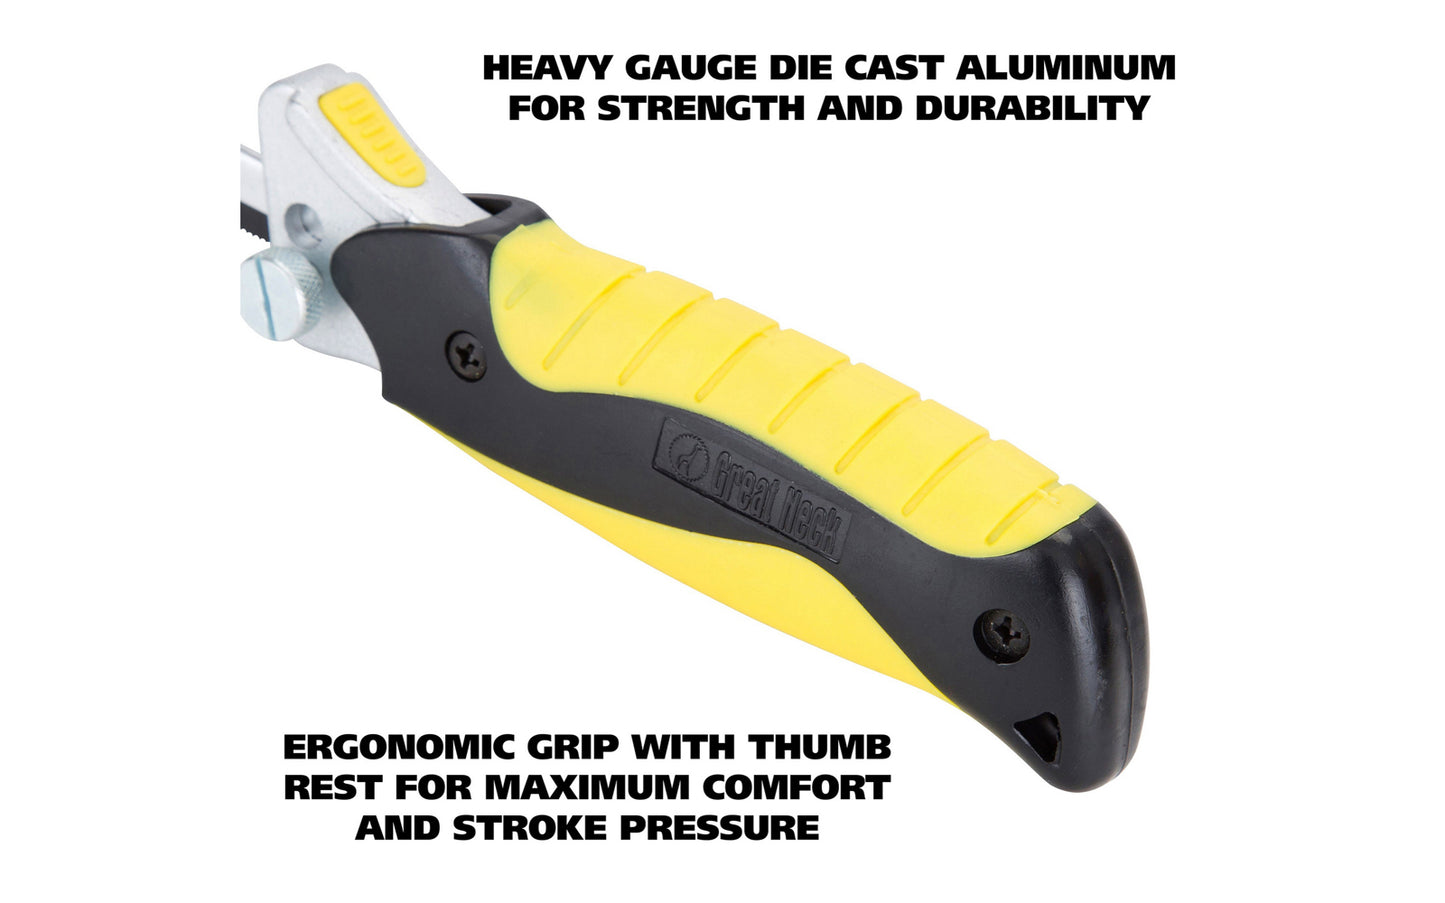 This adjustable close quarter hacksaw helps out when you're in a tight spot. It has an adjustable blade brace to fit any size, style or type of hacksaw blade. Ergonomic grip with thumb rest & optimizes comfort & power & minimizes user fatigue. Includes one 10" carbon steel hacksaw blade. Made by GreatNeck. Model 80070.